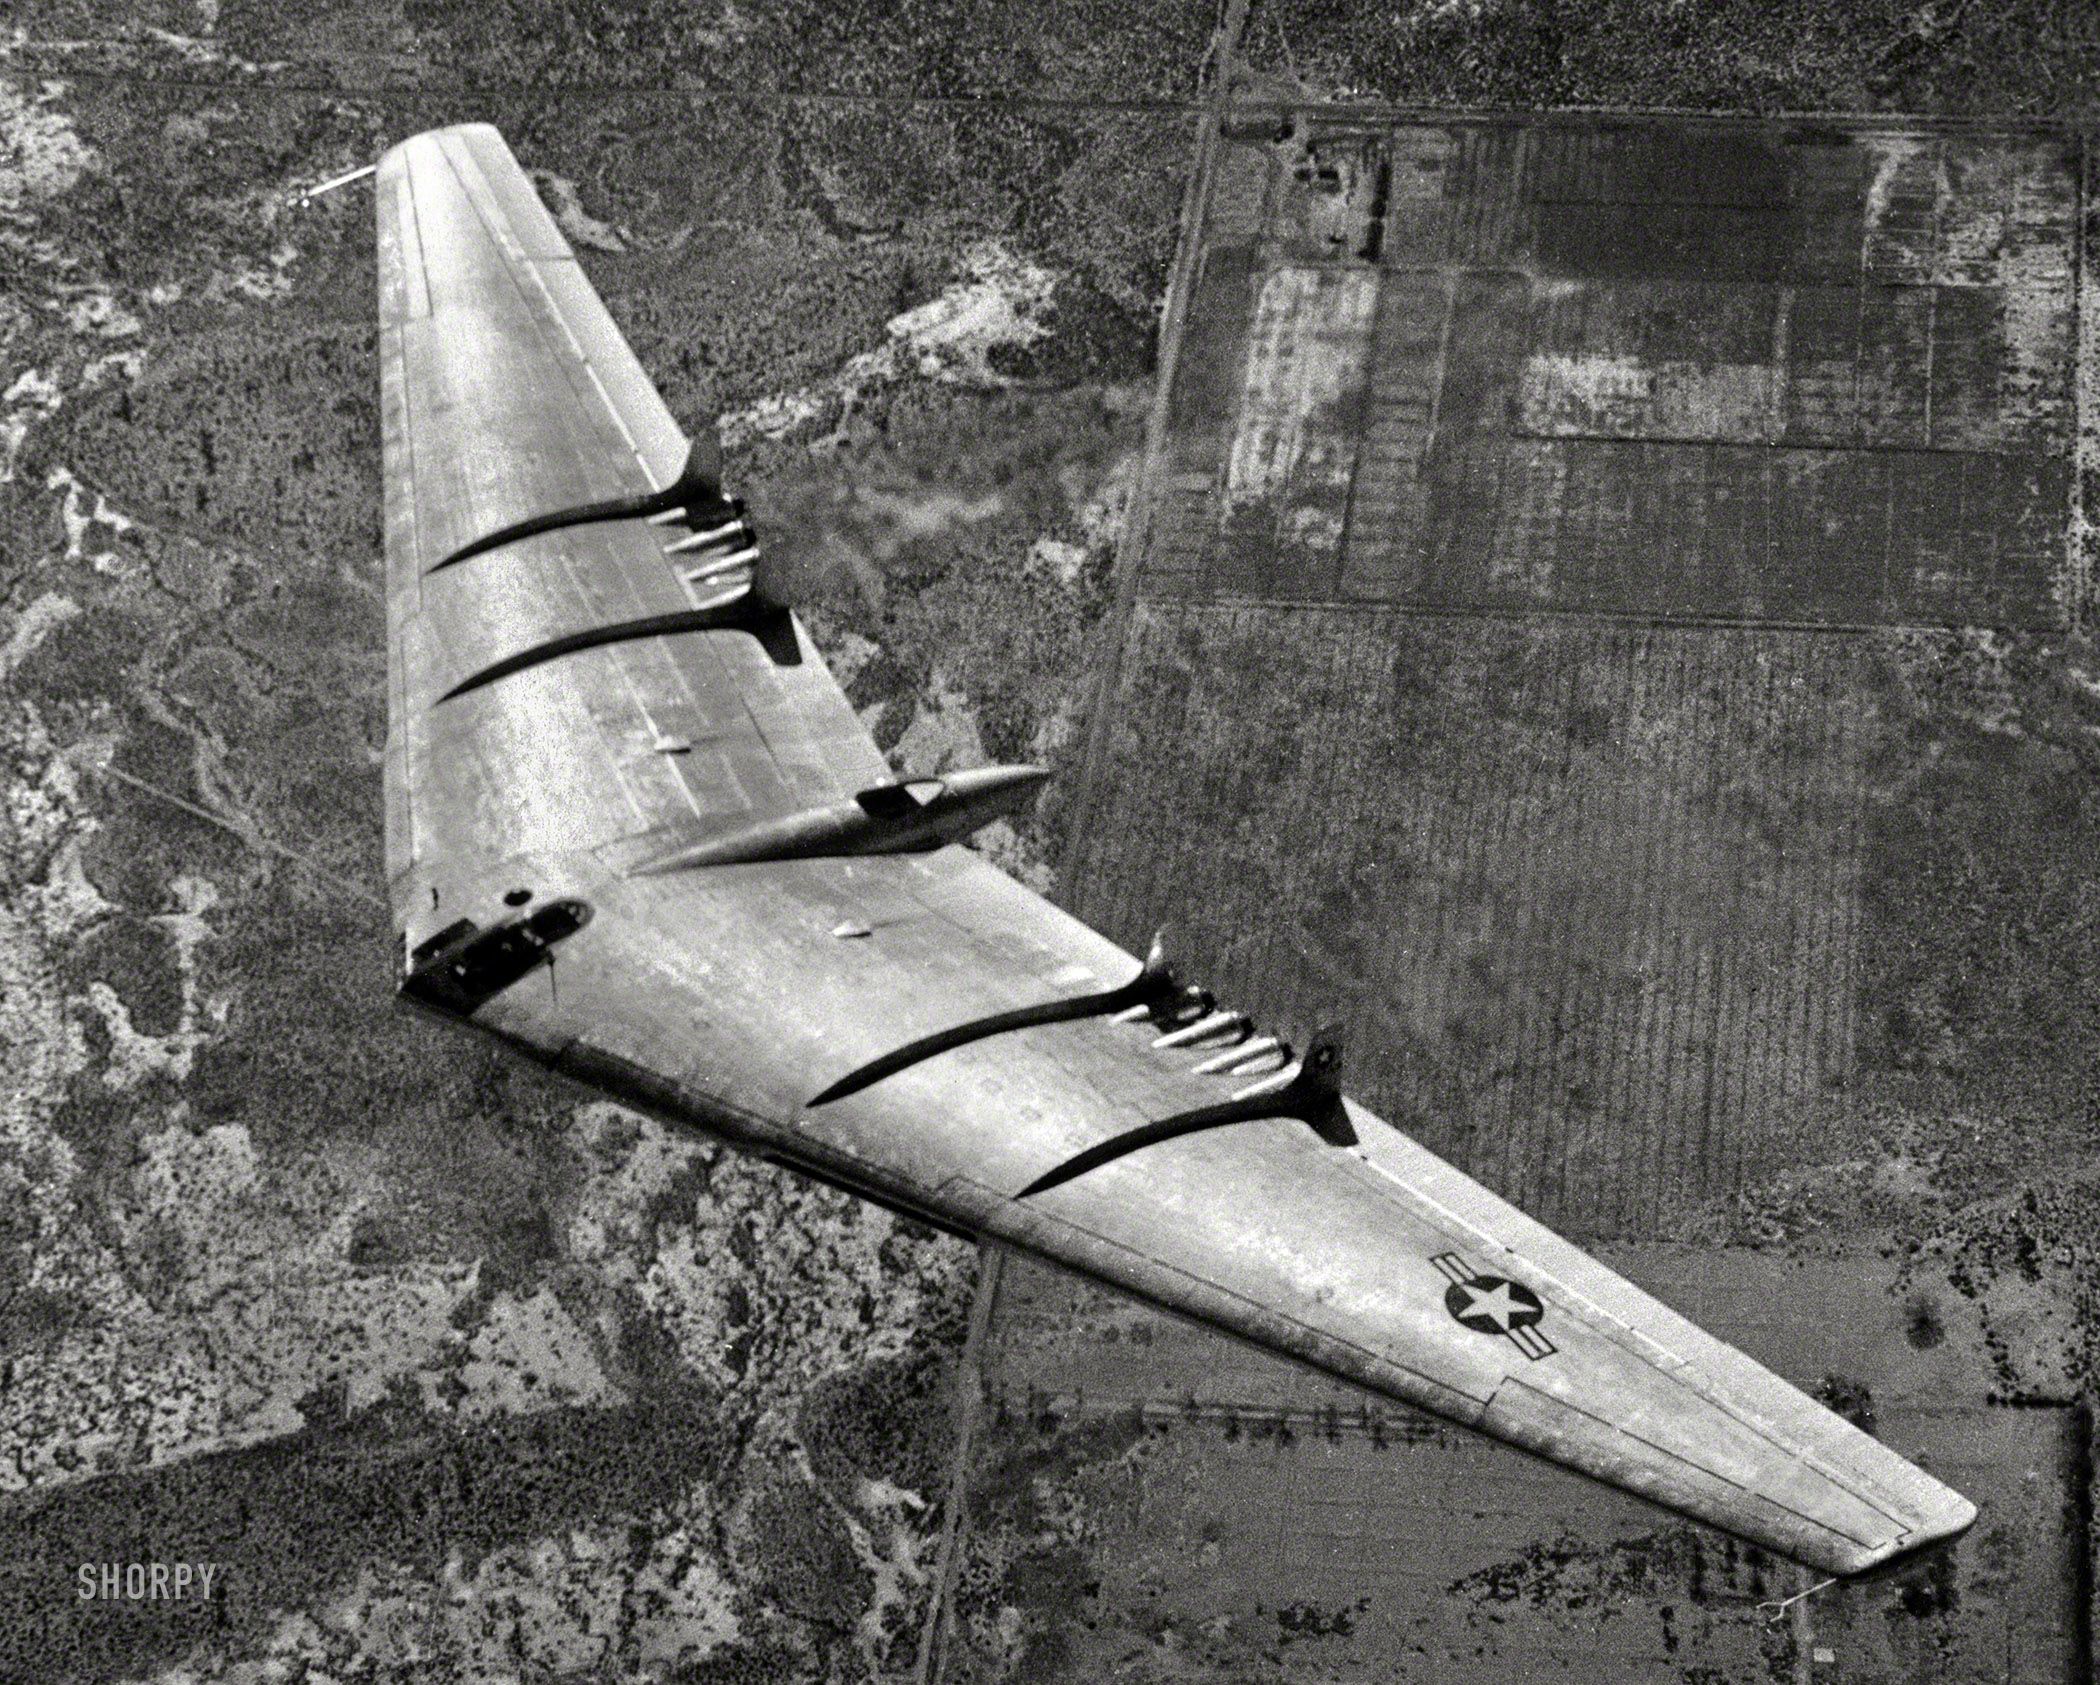 1948. "Aerial view of U.S. Air Force's 100-ton Northrop Flying Wing YB-49 jet bomber in flight. Northrop Aircraft Inc., Hawthorne, California." View full size.